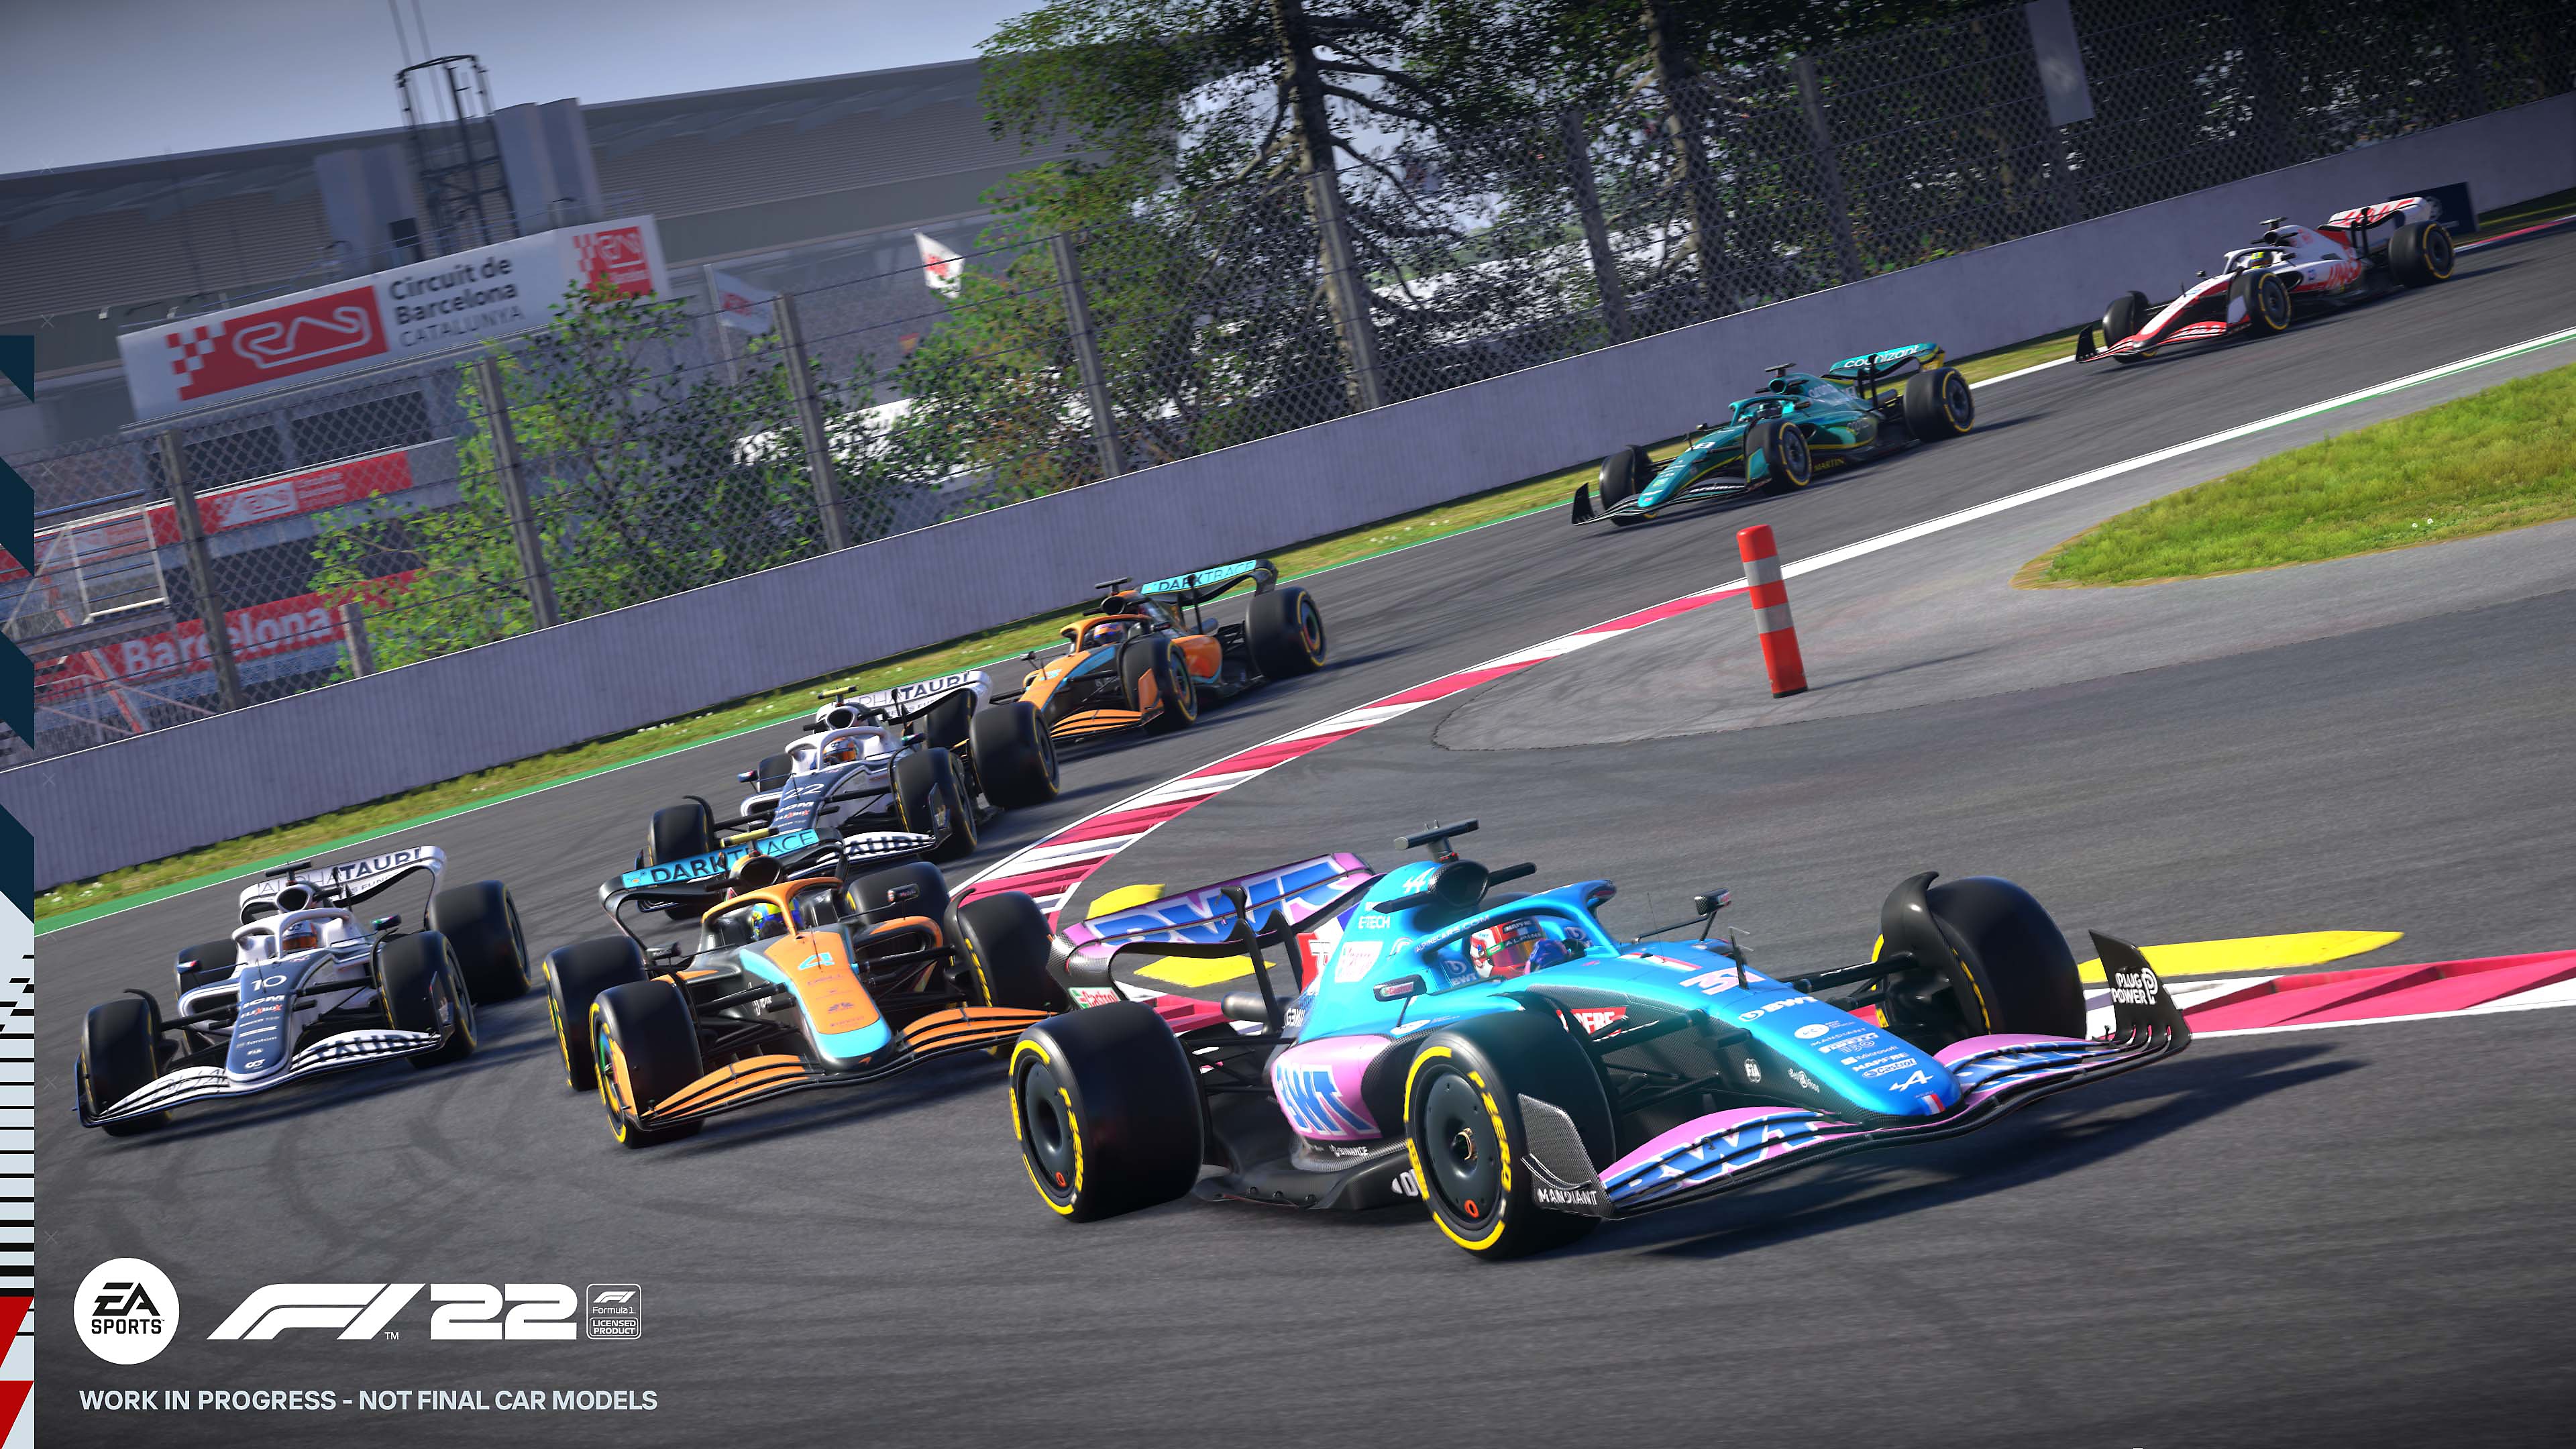 F1 22 screenshot showing an Alpine leading a line of cars